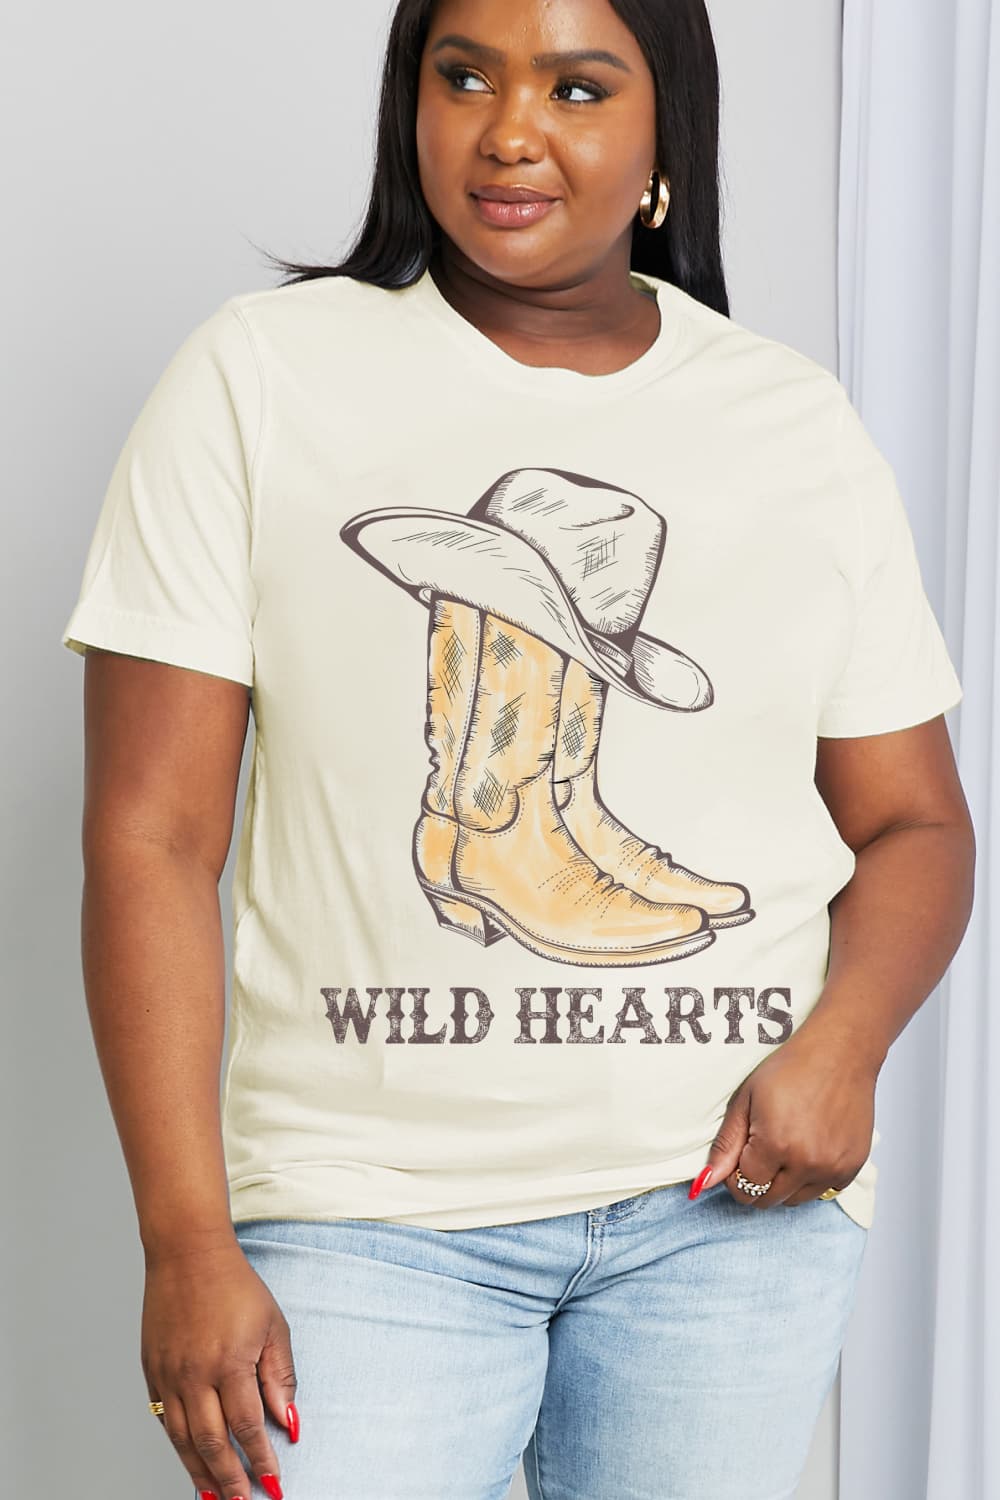 Simply Love WILD HEARTS Graphic Cotton Tee